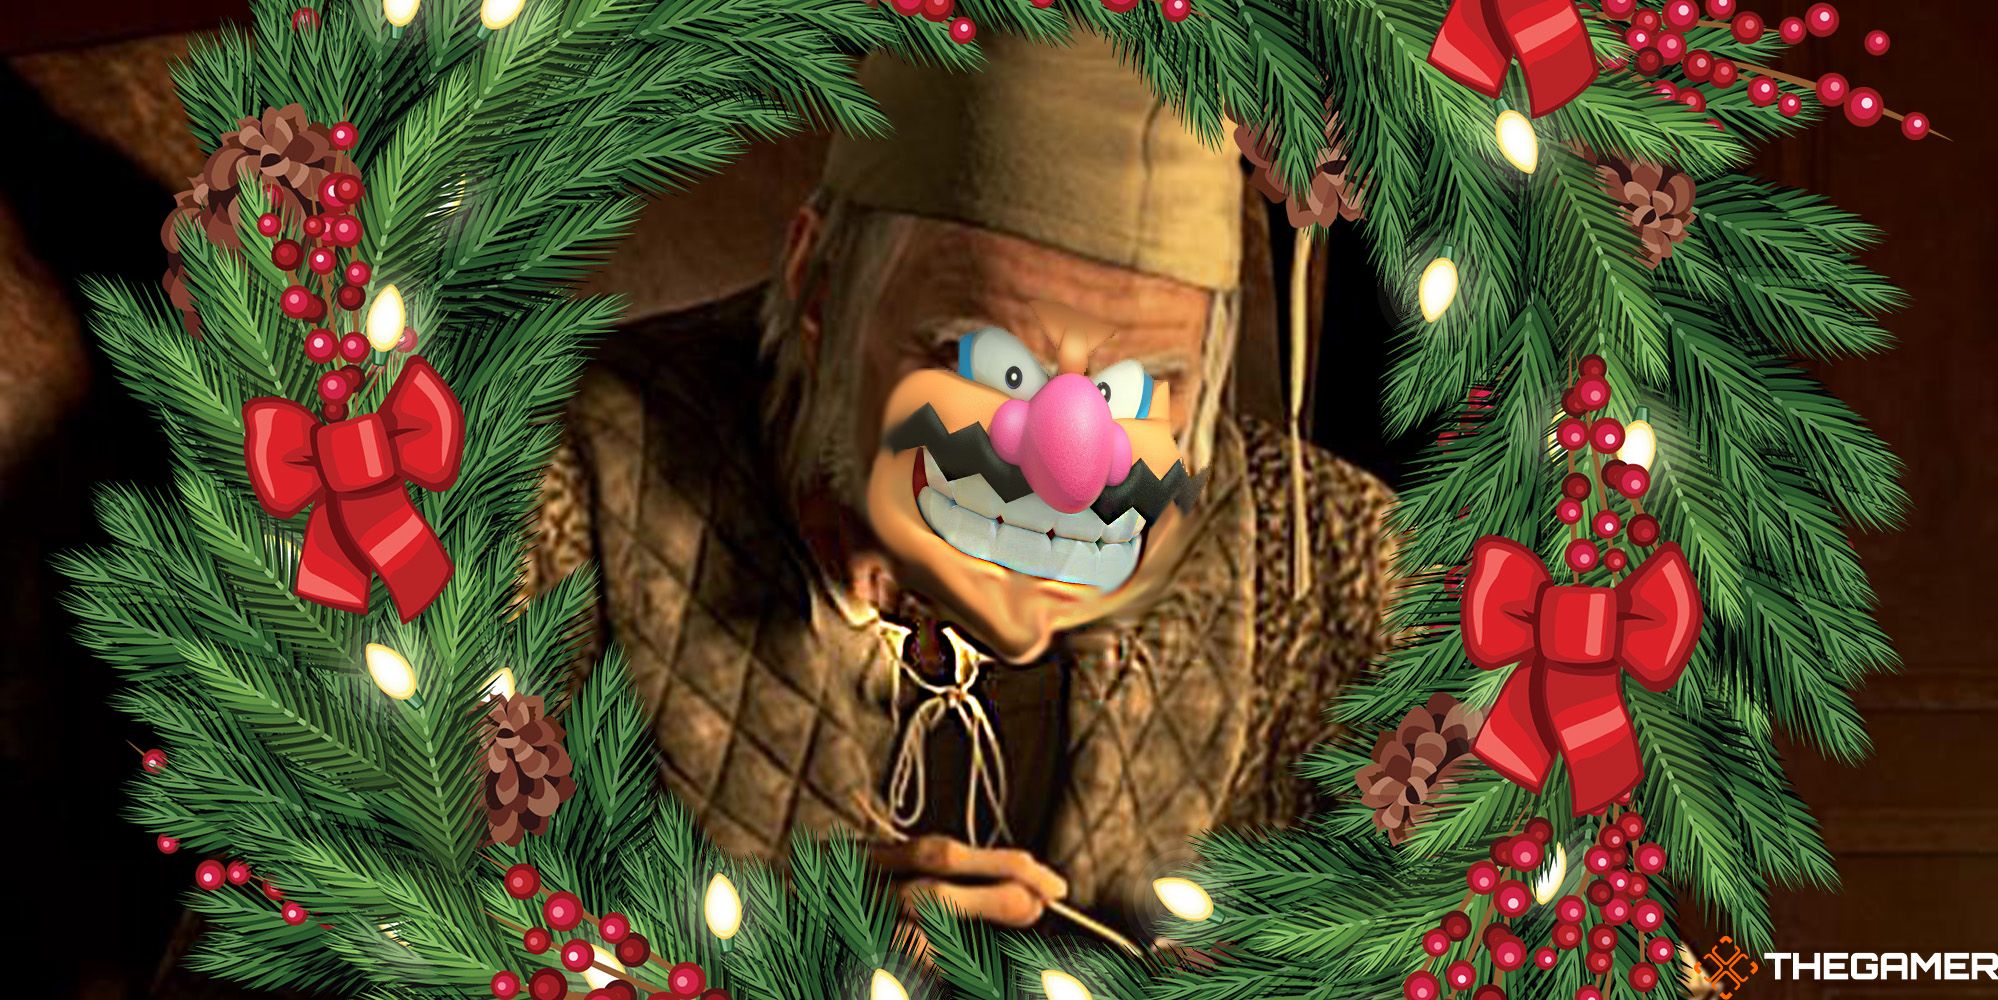 Wario dressed as Ebenezer Scrooge surrounded by a Christmas wreath. Feature Image for TG.